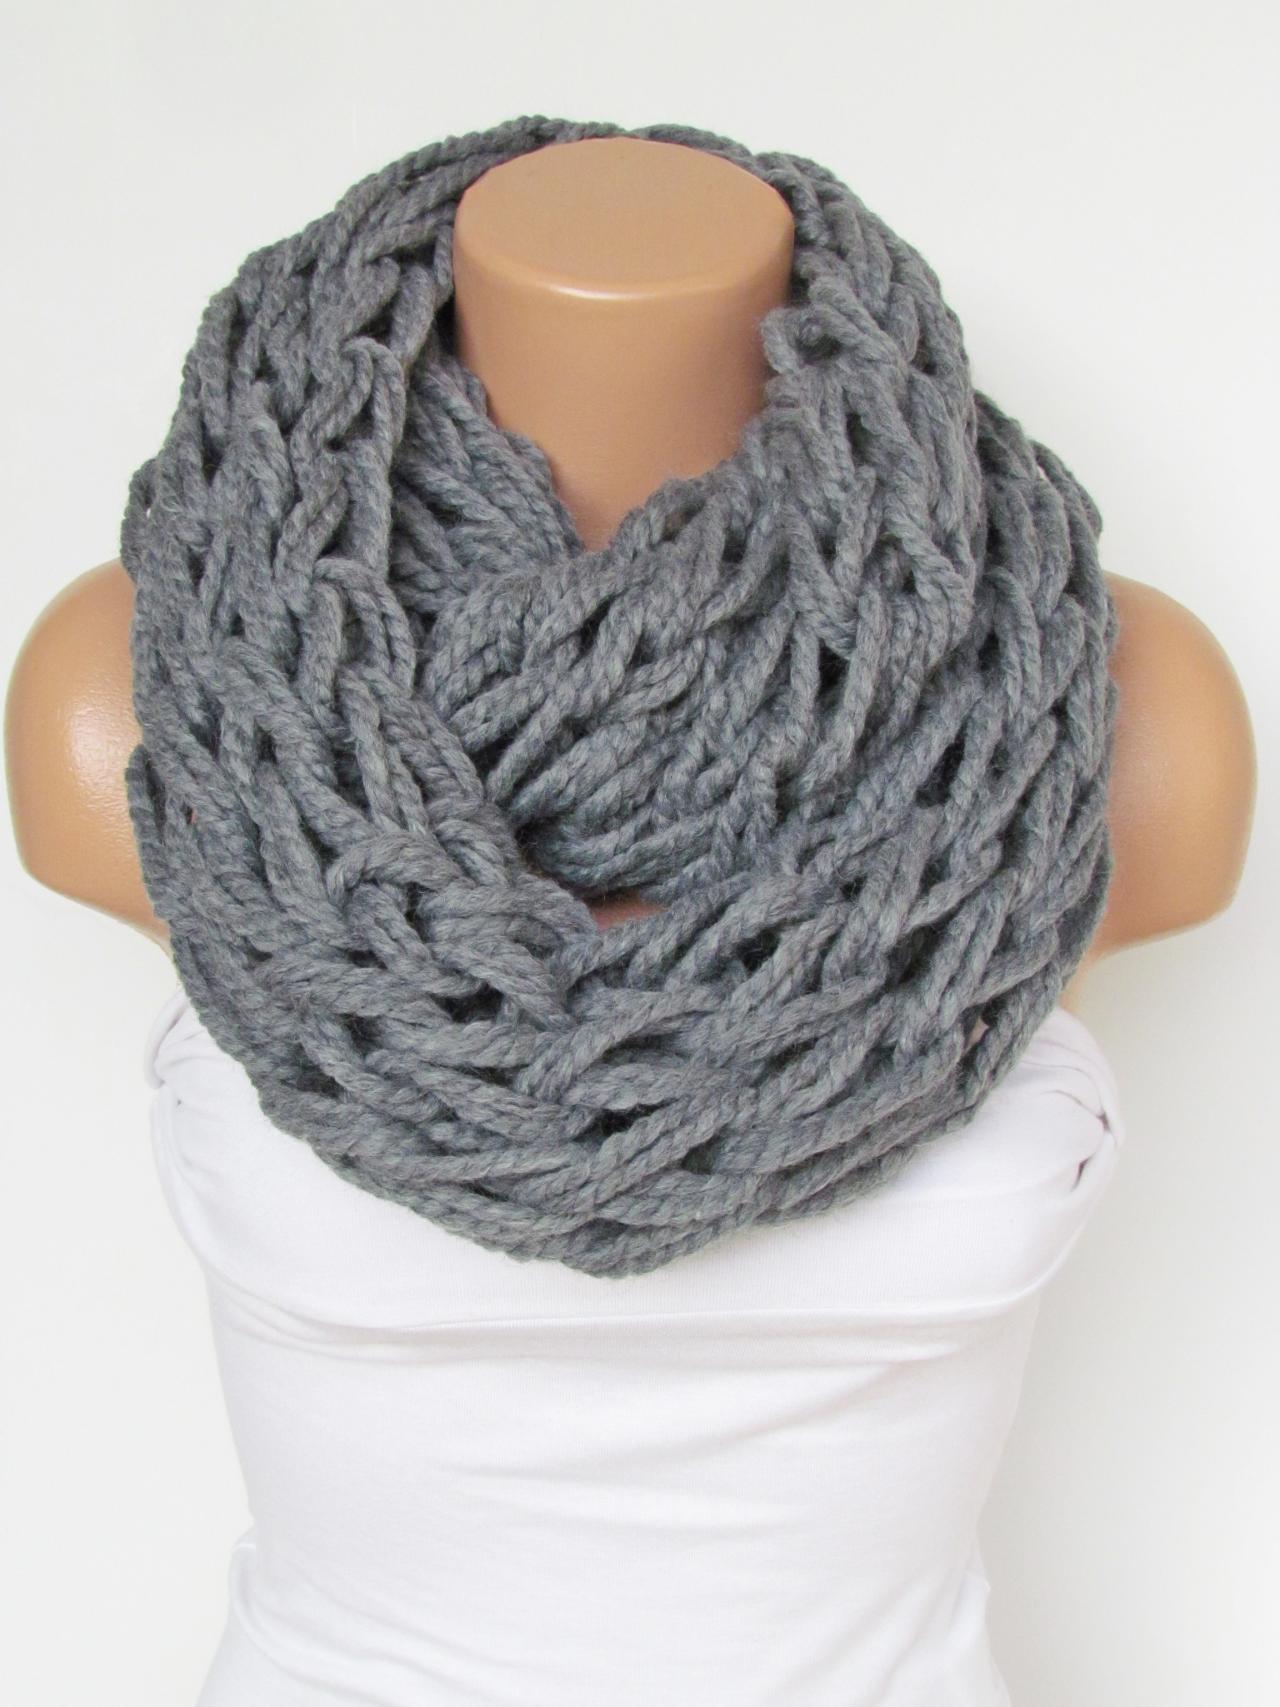 Infinity Gray Scarf,Neckwarmer,Knitted Scarf,Circle Loop Scarf, Winter Accessories, Fall Fashion,Chunky Scarf.Cowl Scarf